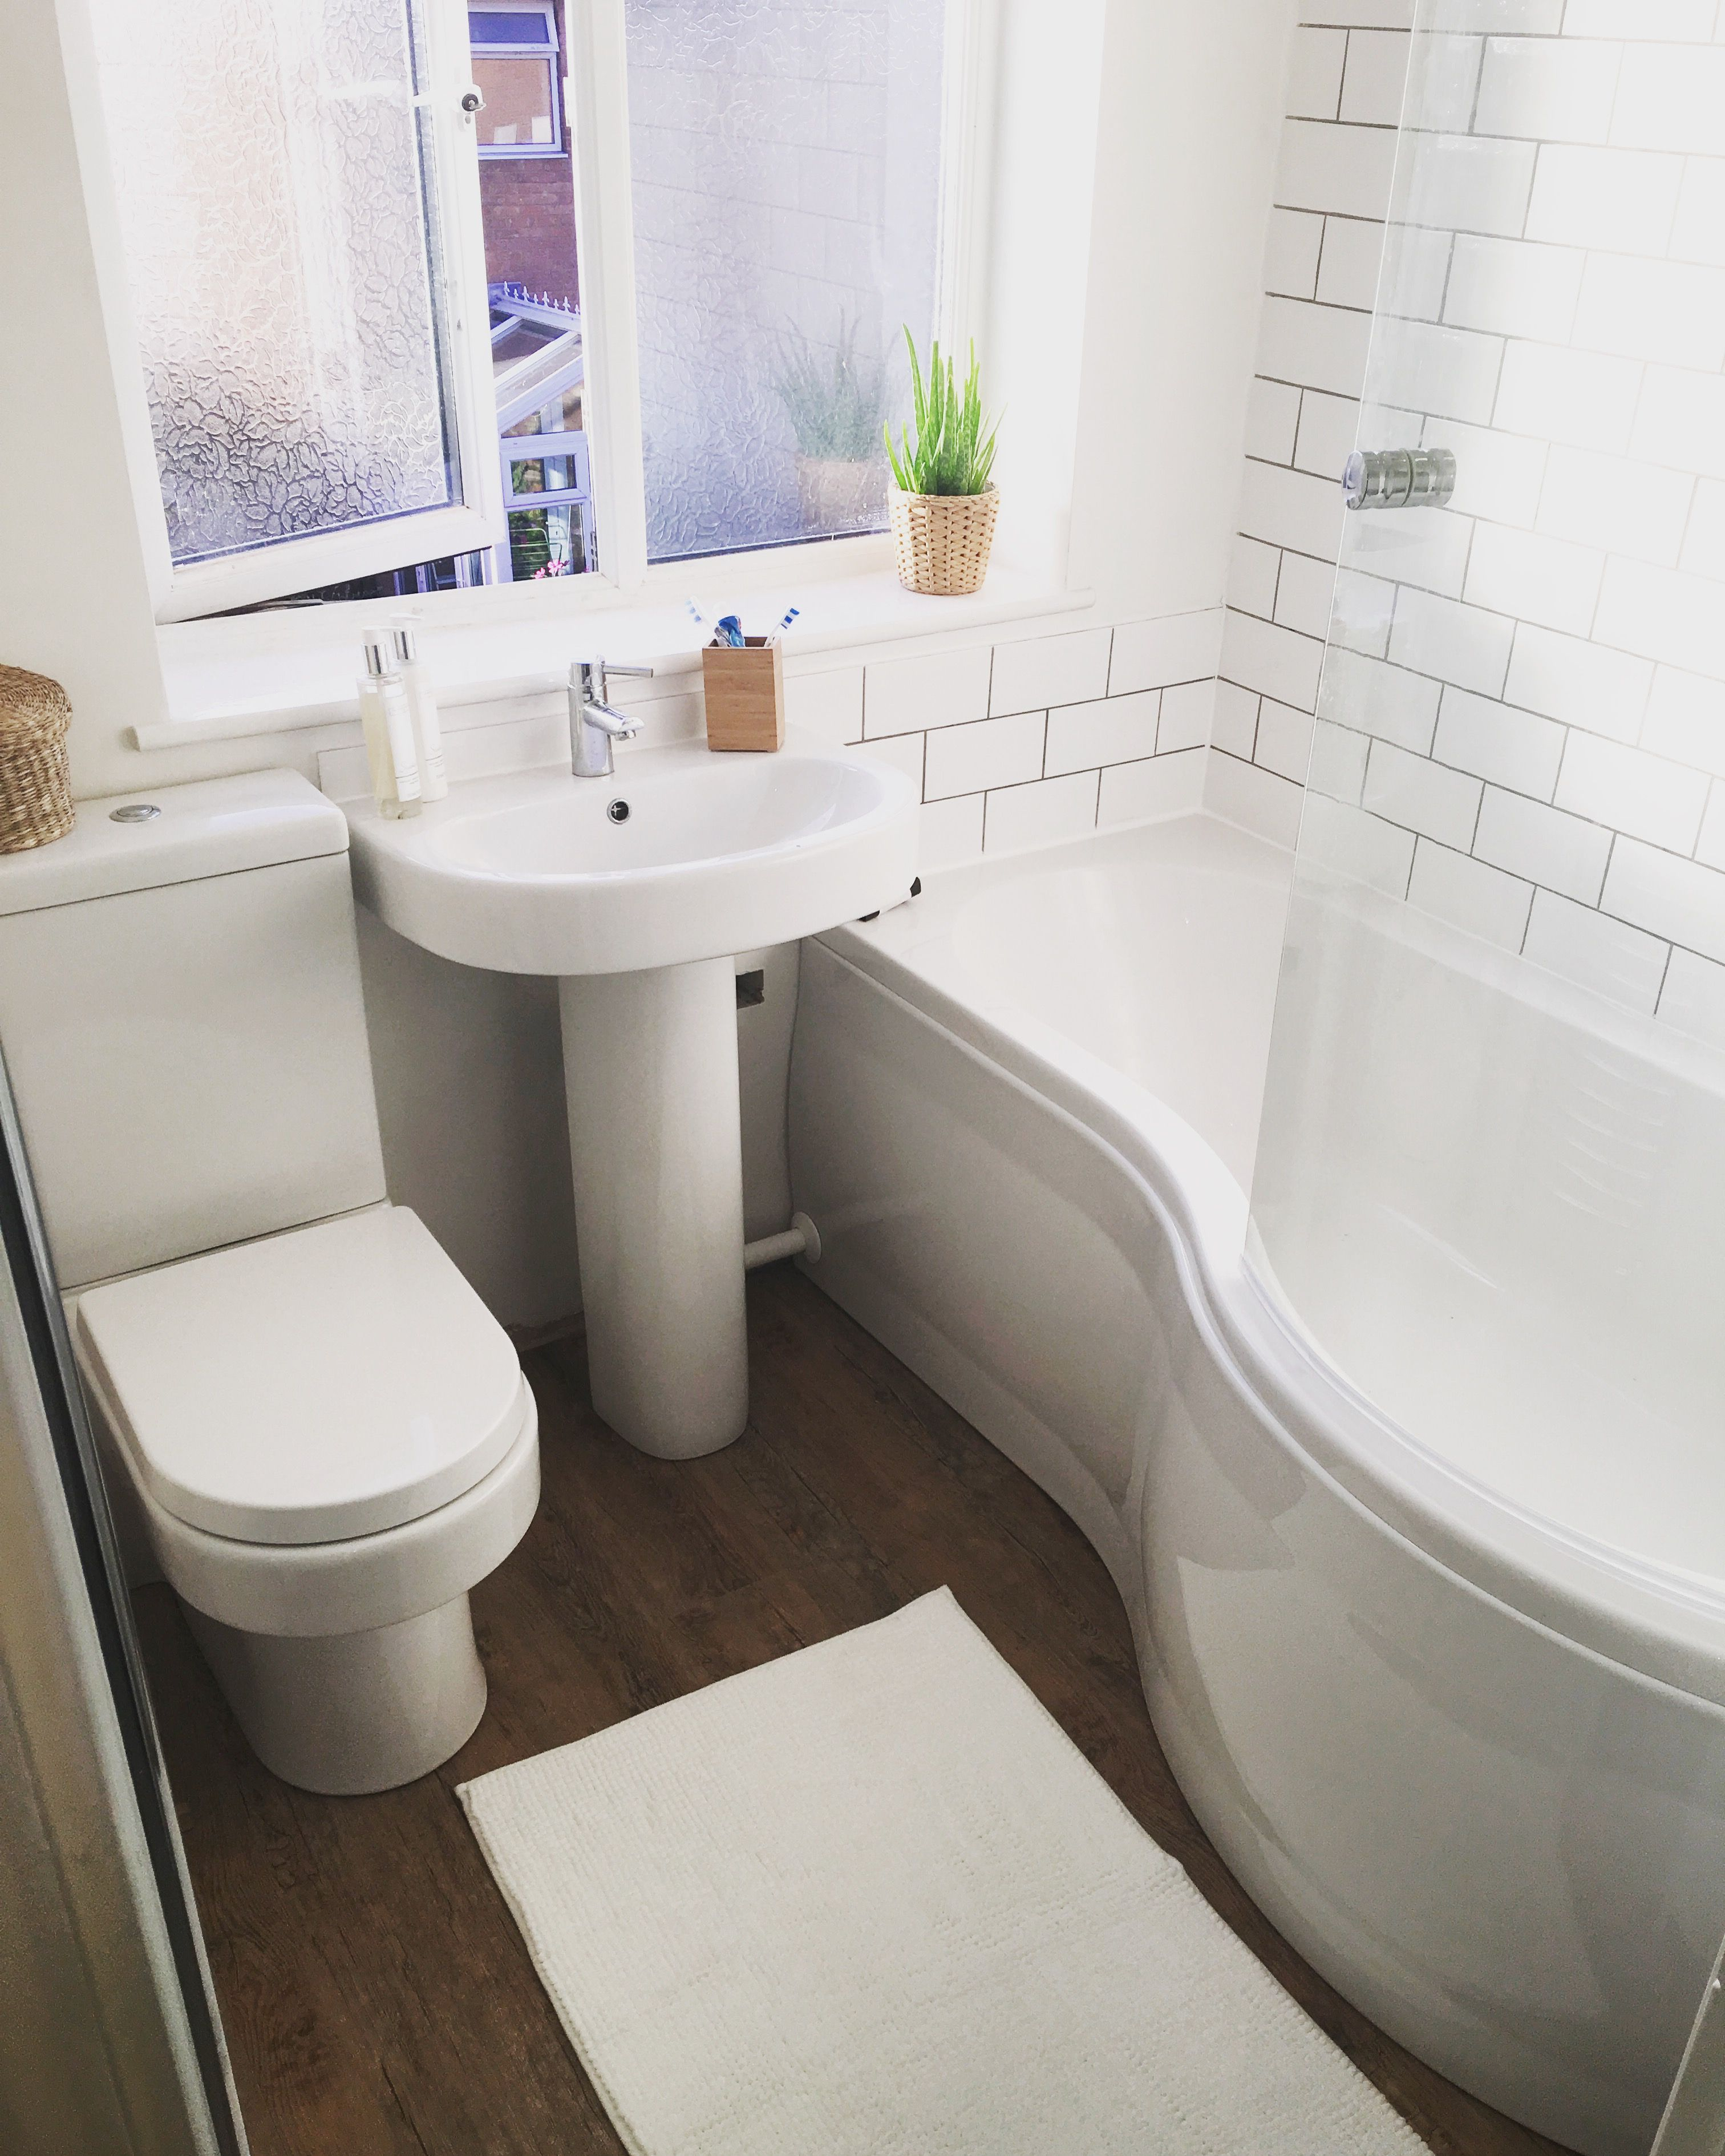 White Metro Tiles Matched With Dark Ash Grout Bathroom Suite From regarding size 3024 X 3779